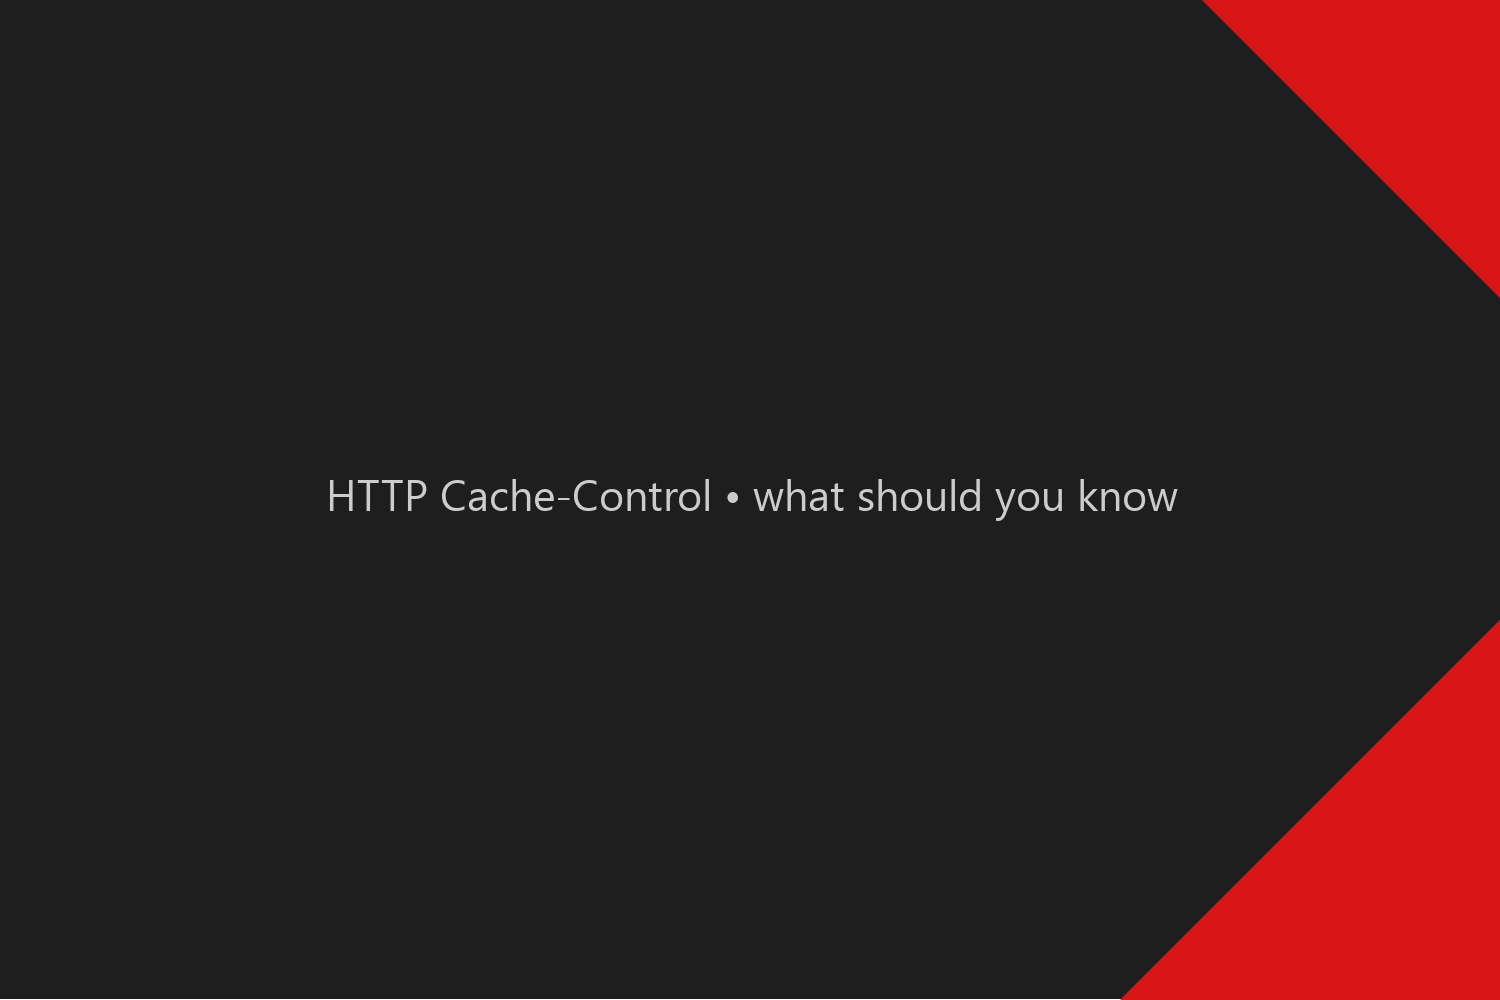 HTTP Cache-Control • what should you know